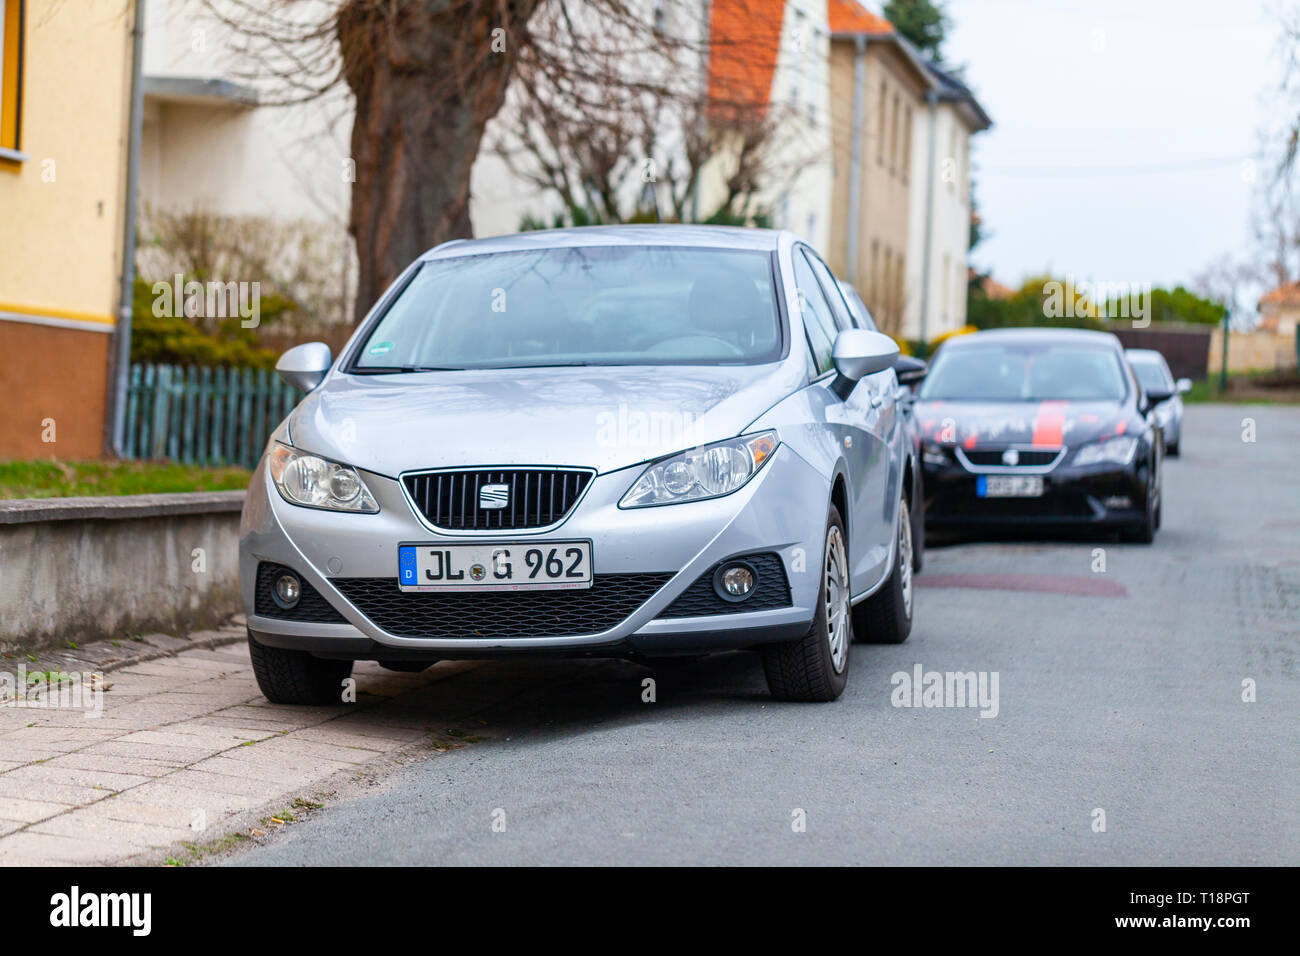 BURG / GERMANY - MARCH 3, 2019: Seat Ibiza stands on a street in Burg. Seat is a Spanish automobile manufacturer with its head office in Martorell, Sp Stock Photo